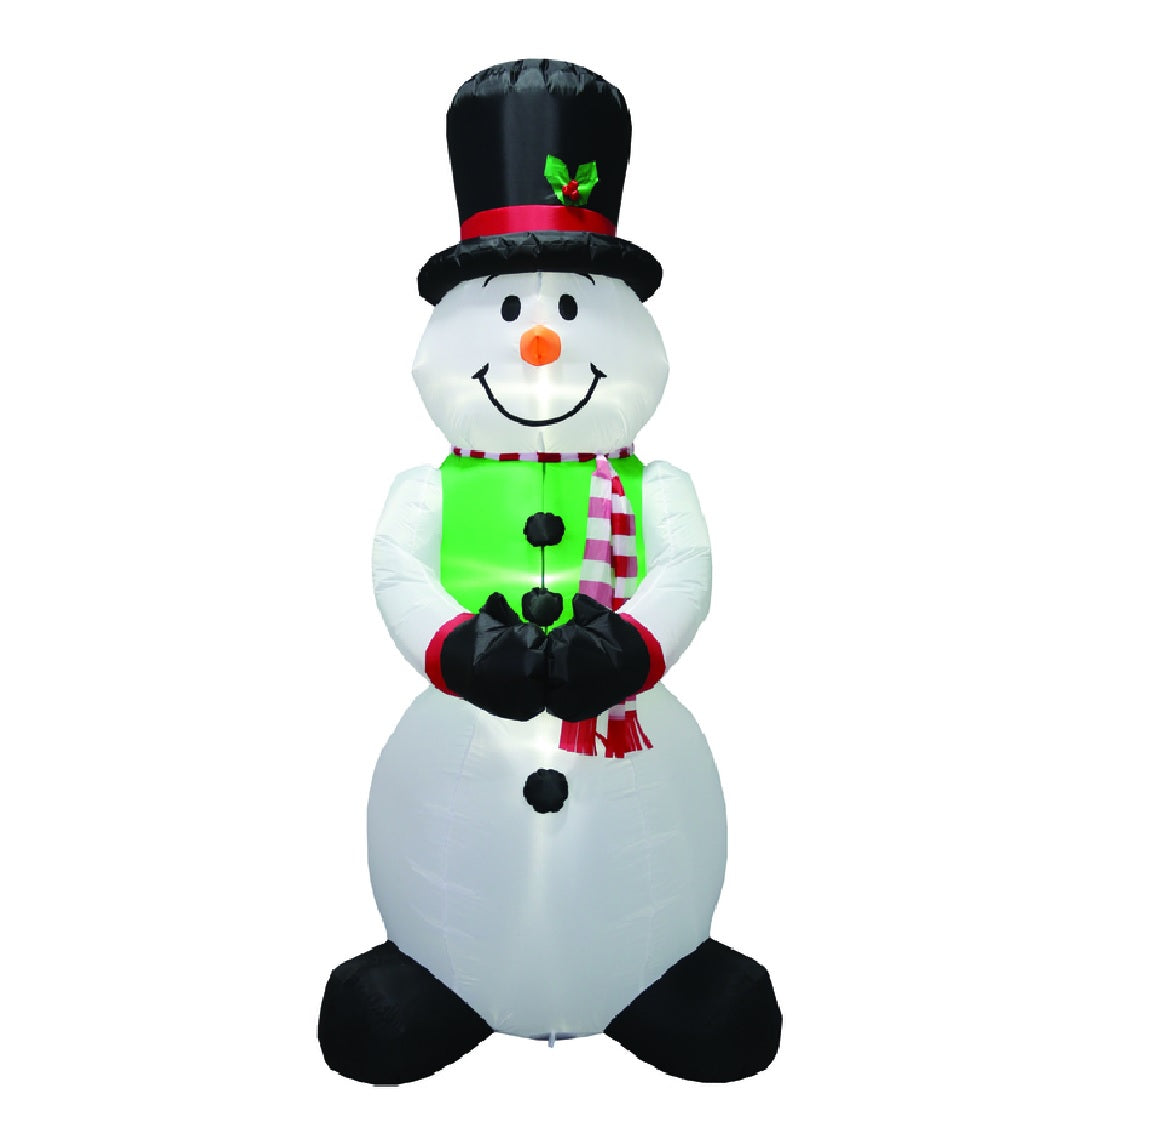 Celebrations MY-20S820 Inflatable Snowman, 8 Feet